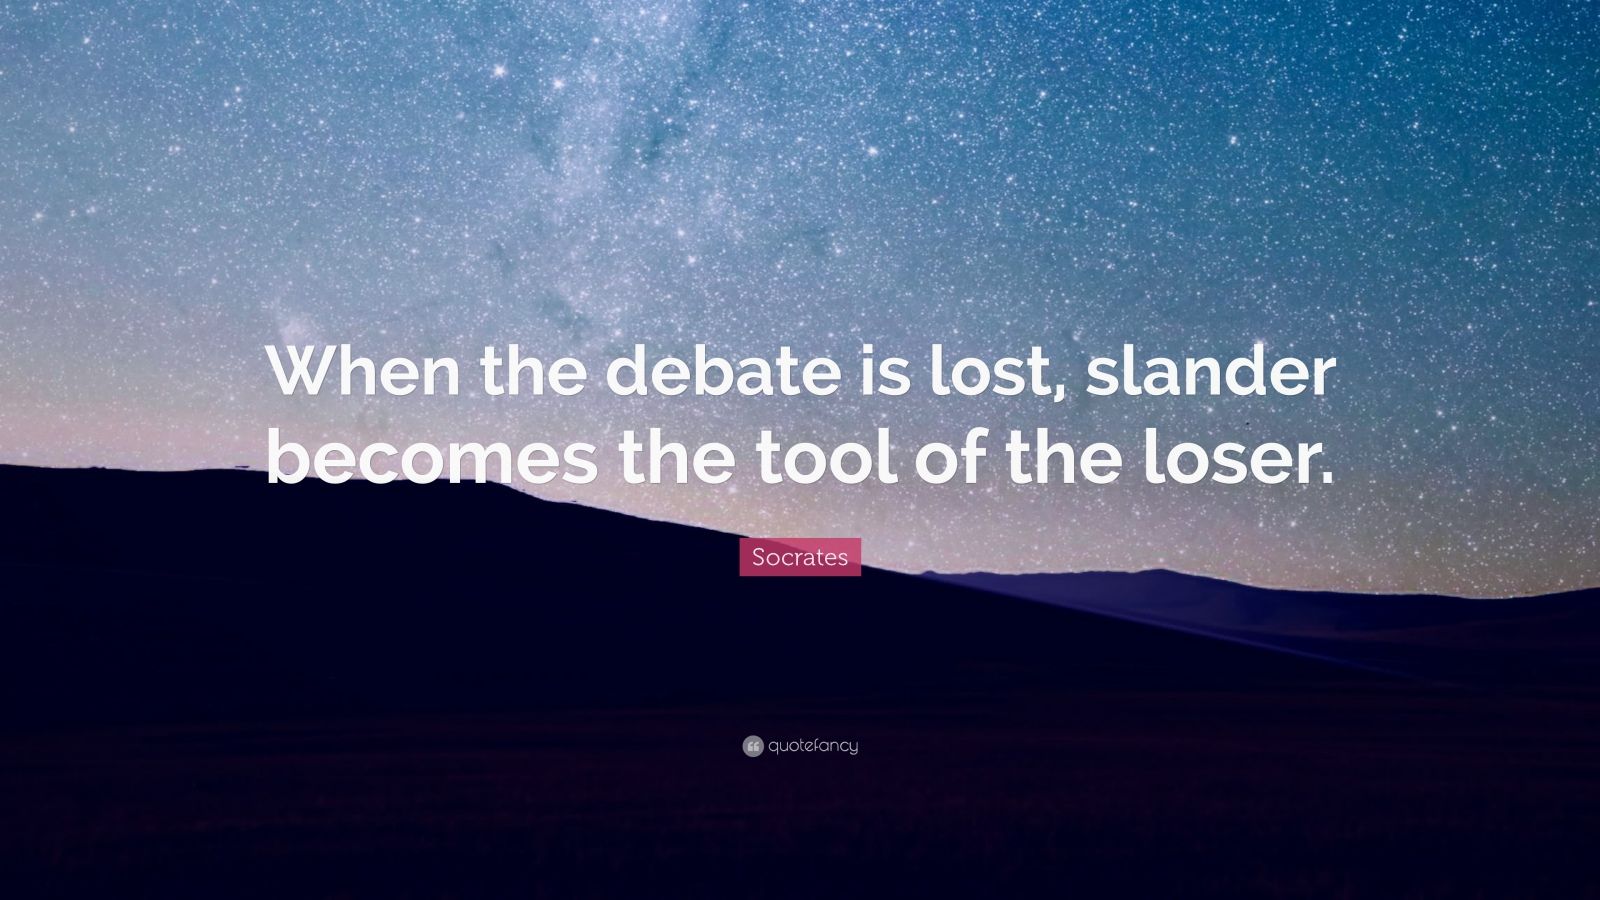 Socrates Quote: “When the debate is lost, slander becomes the tool of